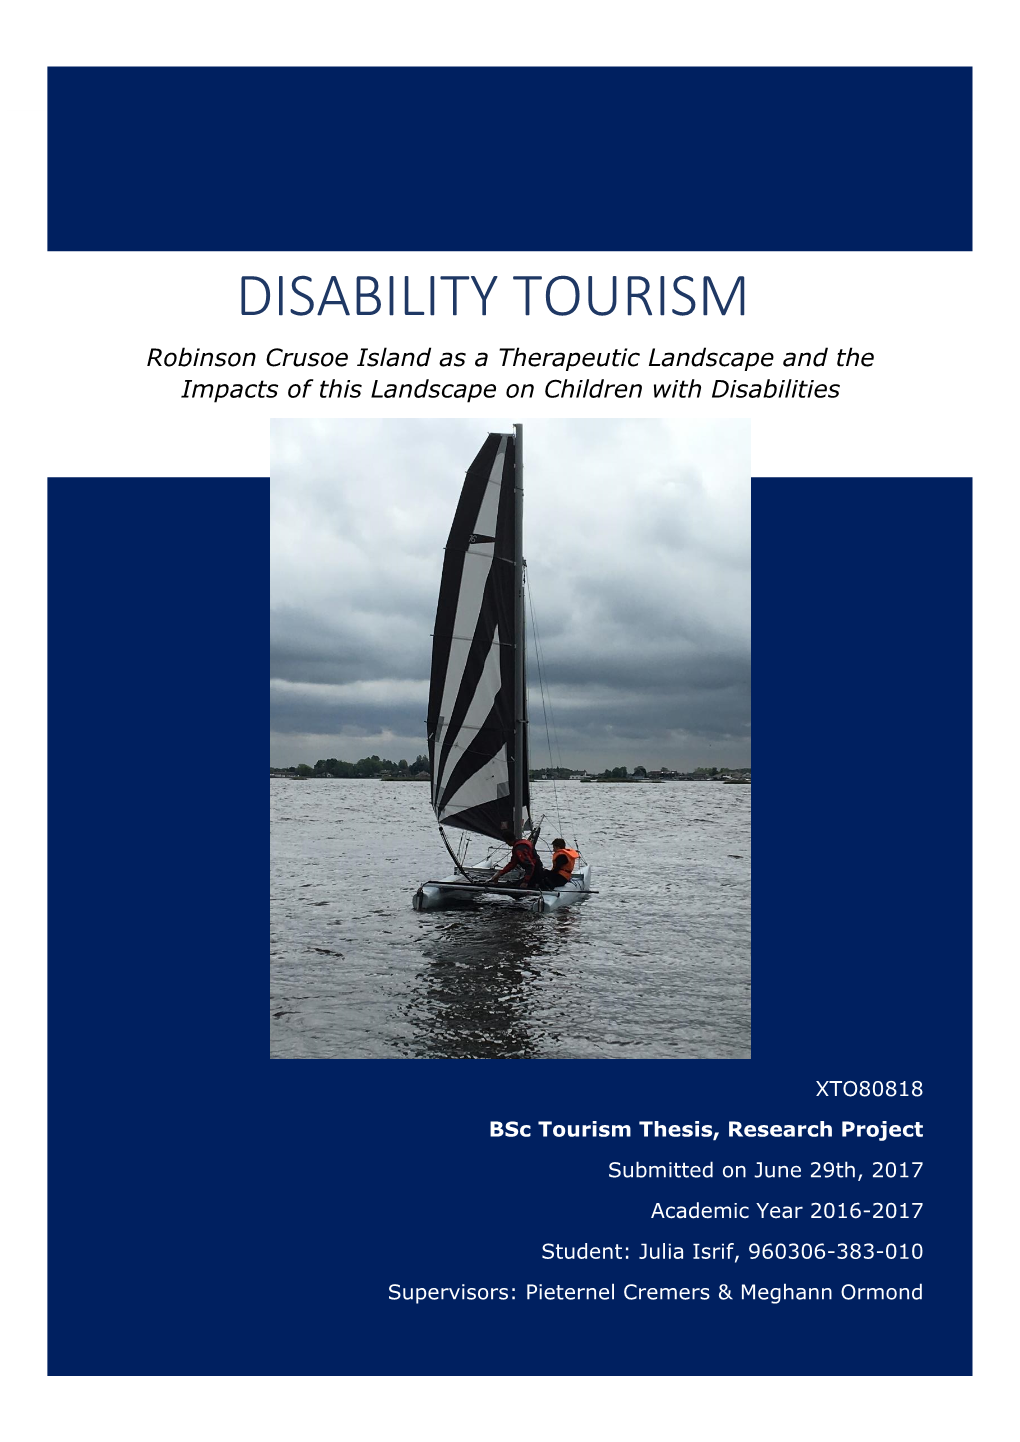 DISABILITY TOURISM Robinson Crusoe Island As a Therapeutic Landscape and the Impacts of This Landscape on Children with Disabilities